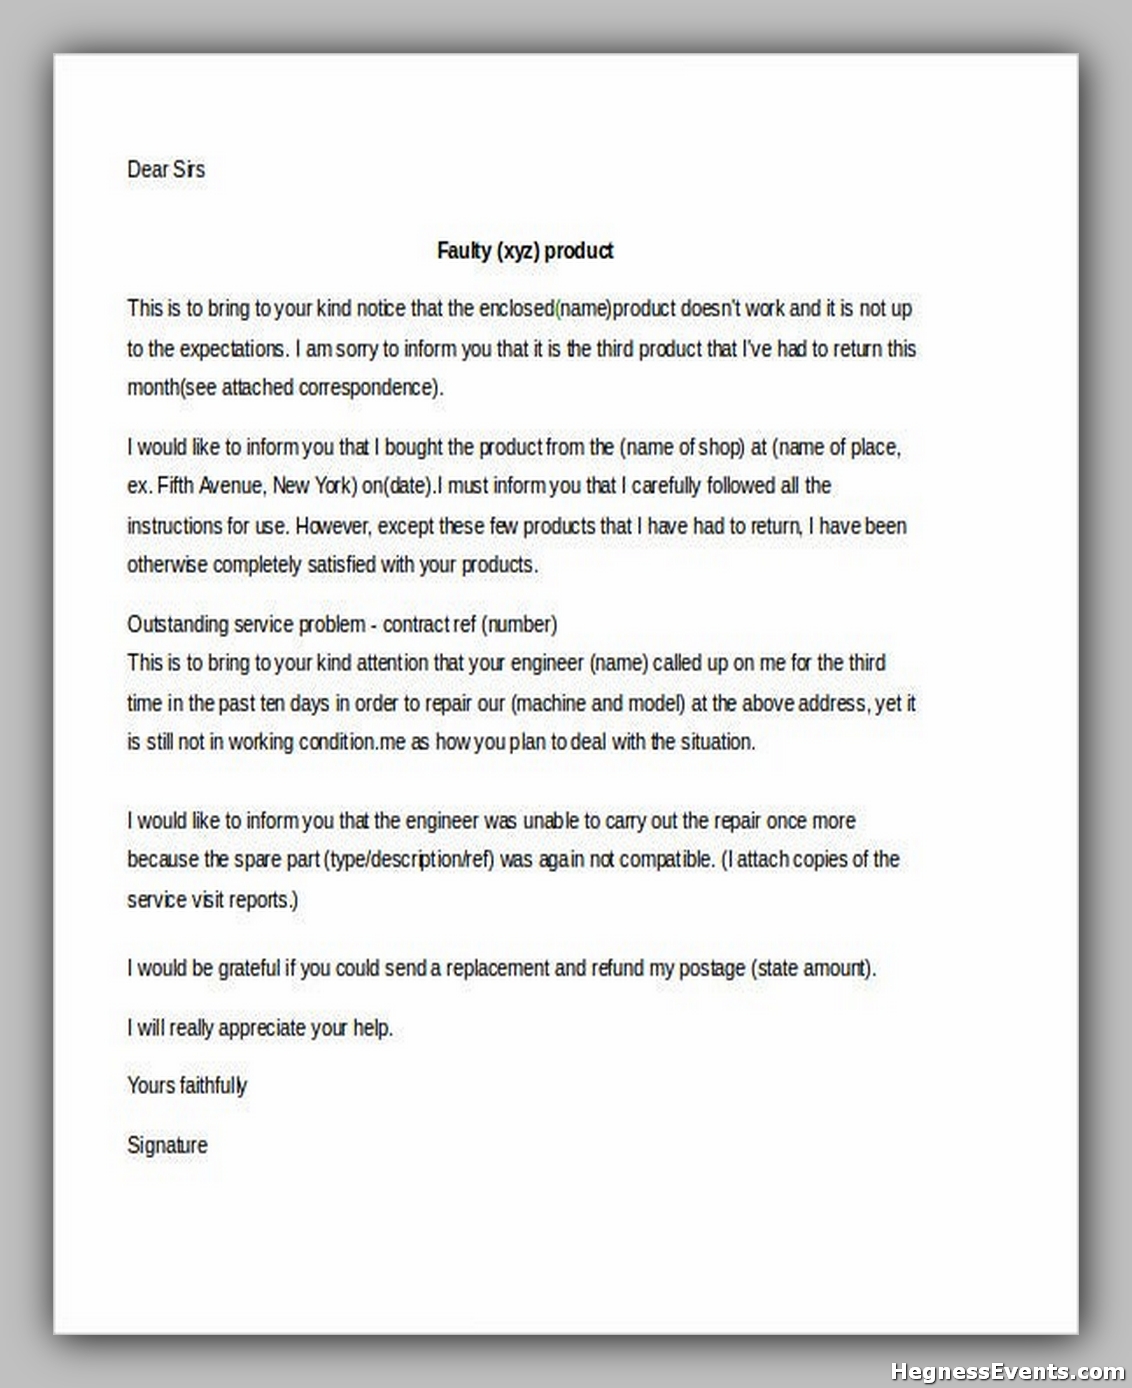 20+ Great Consumer Complaint Letter - hennessy events